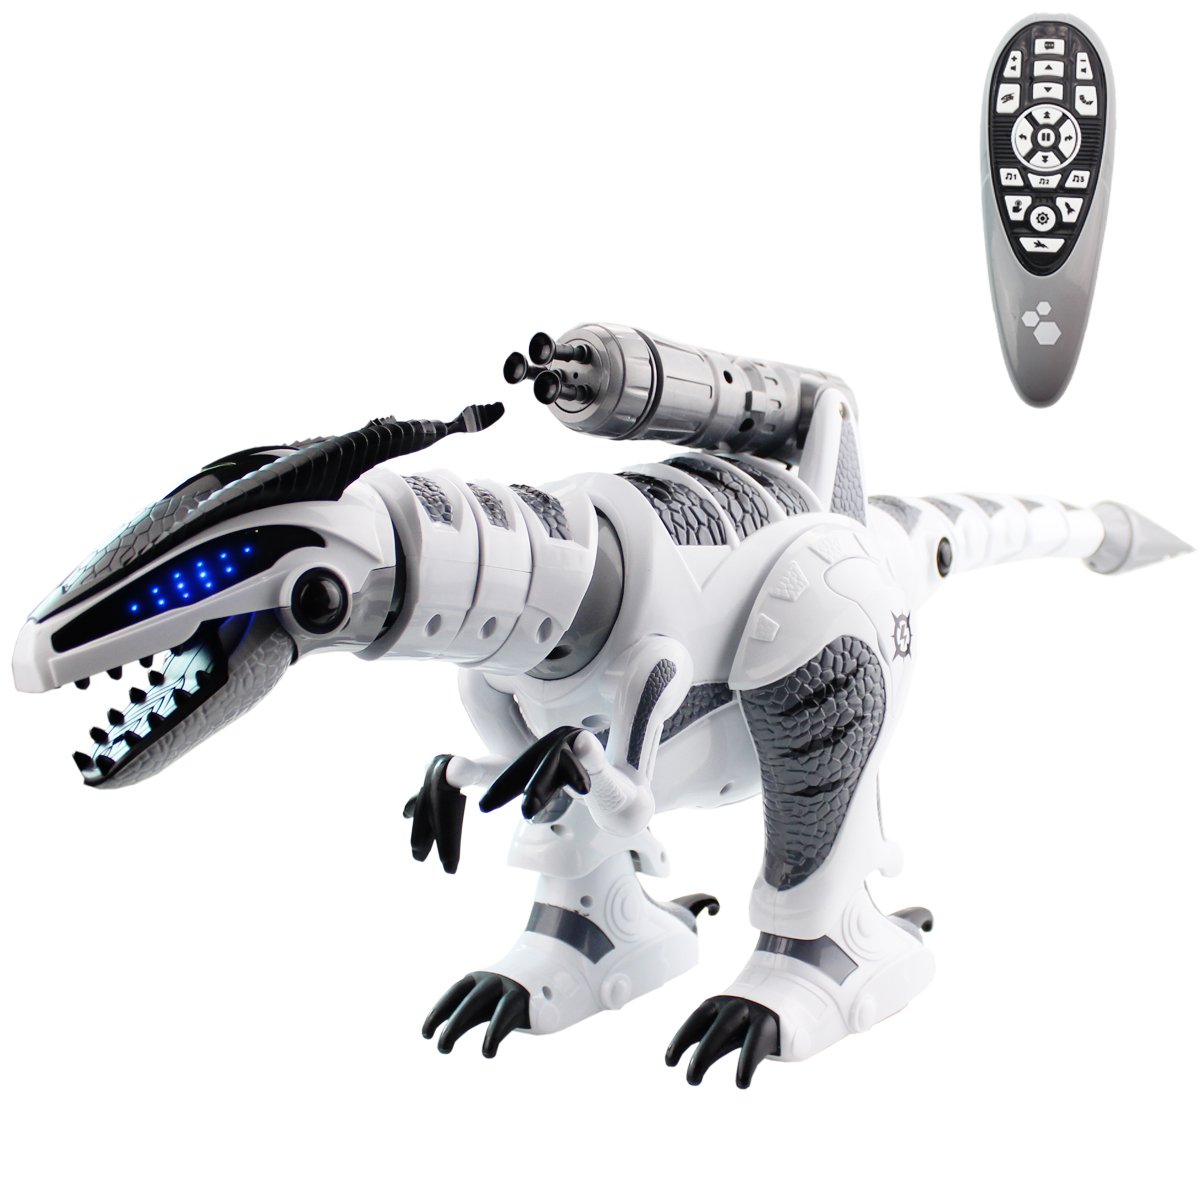 Top 7 Best Robot Dinosaur Toys Reviews in 2023 7